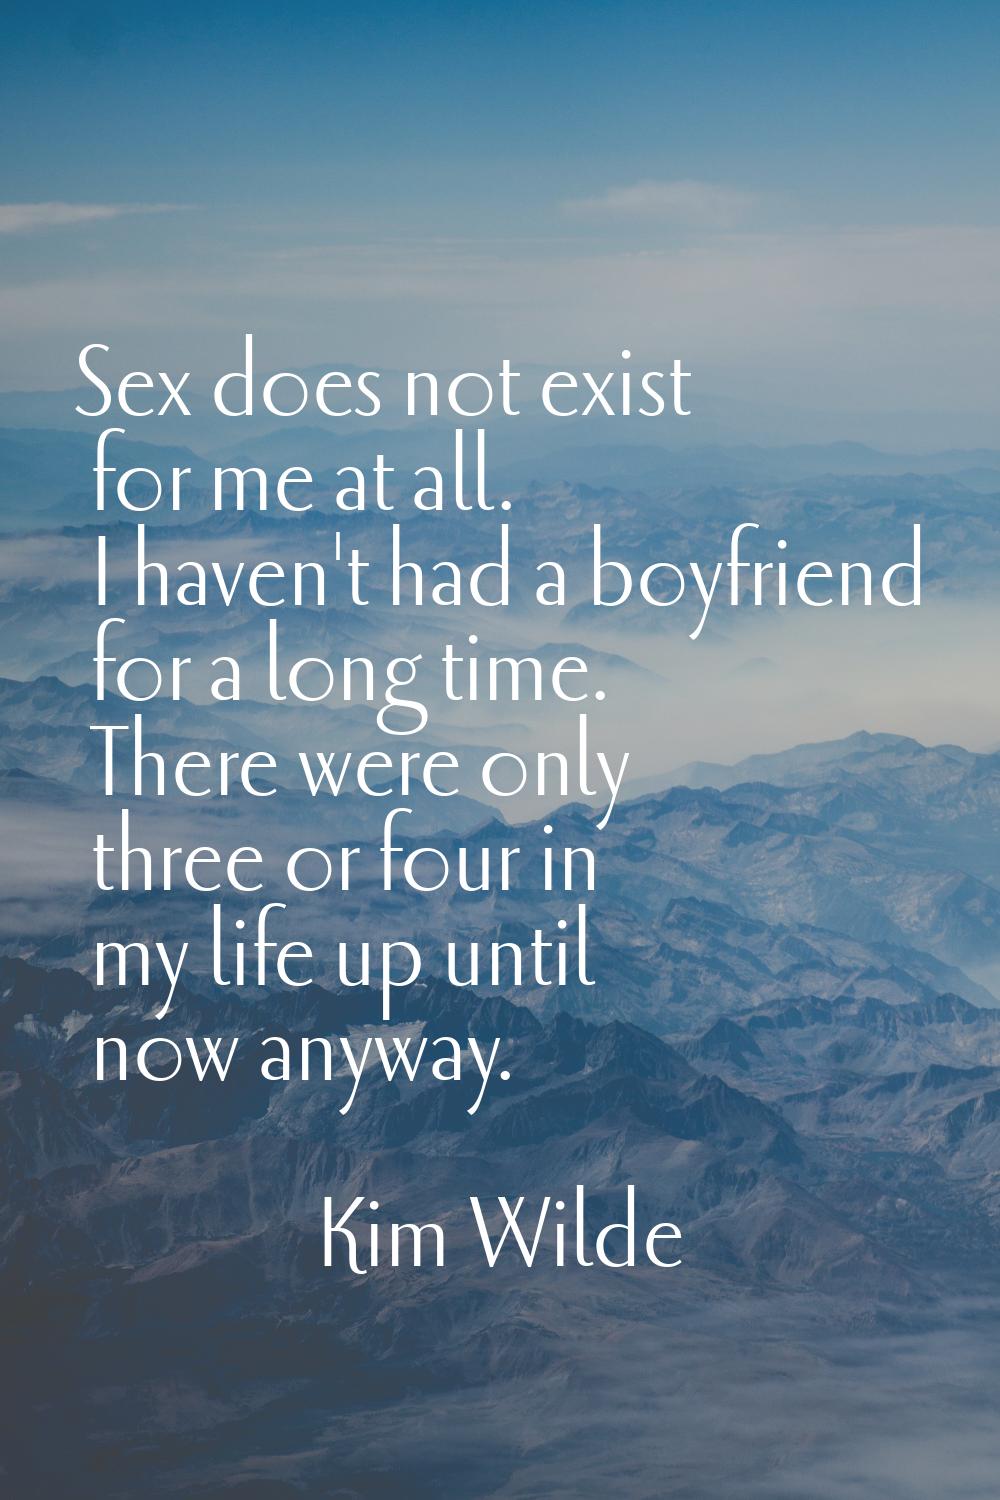 Sex does not exist for me at all. I haven't had a boyfriend for a long time. There were only three 